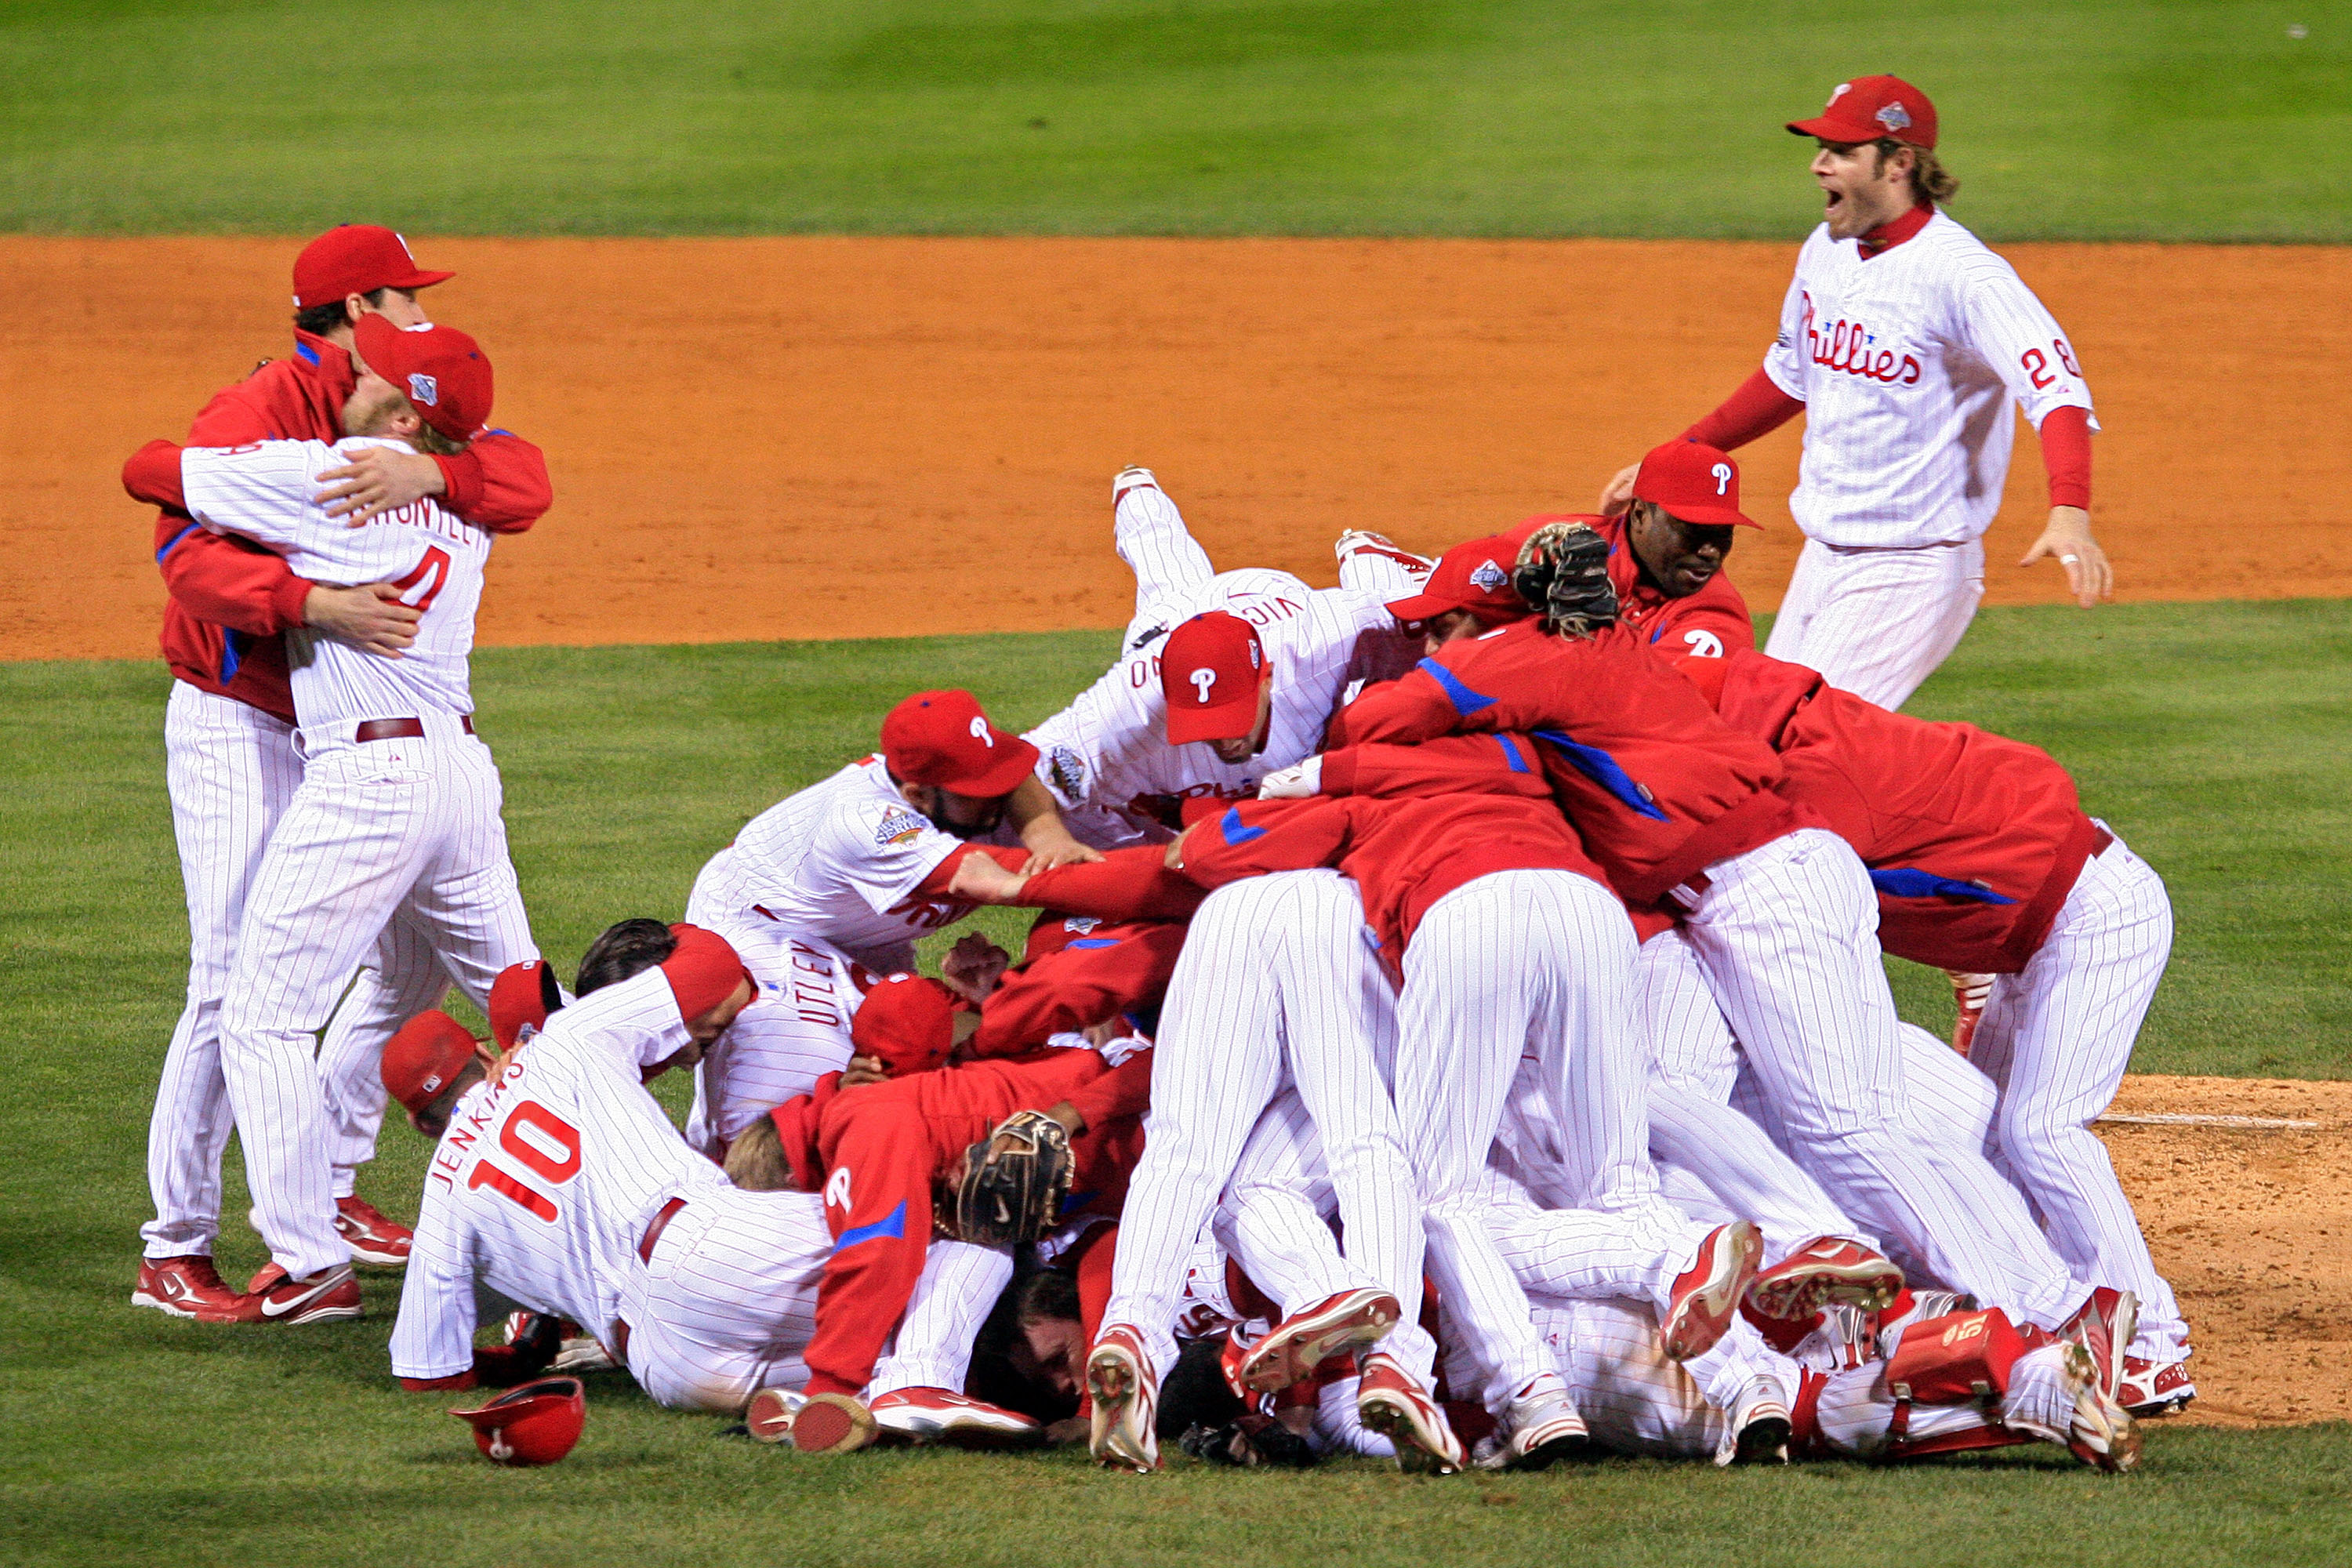 PHILADELPHIA - OCTOBER 29:  The Philadelphia Phillies pile on top of closing pitcher Brad Lidge #54 after they won 4-3 to win the World Series against the Tampa Bay Rays during the continuation of game five of the 2008 MLB World Series on October 29, 2008